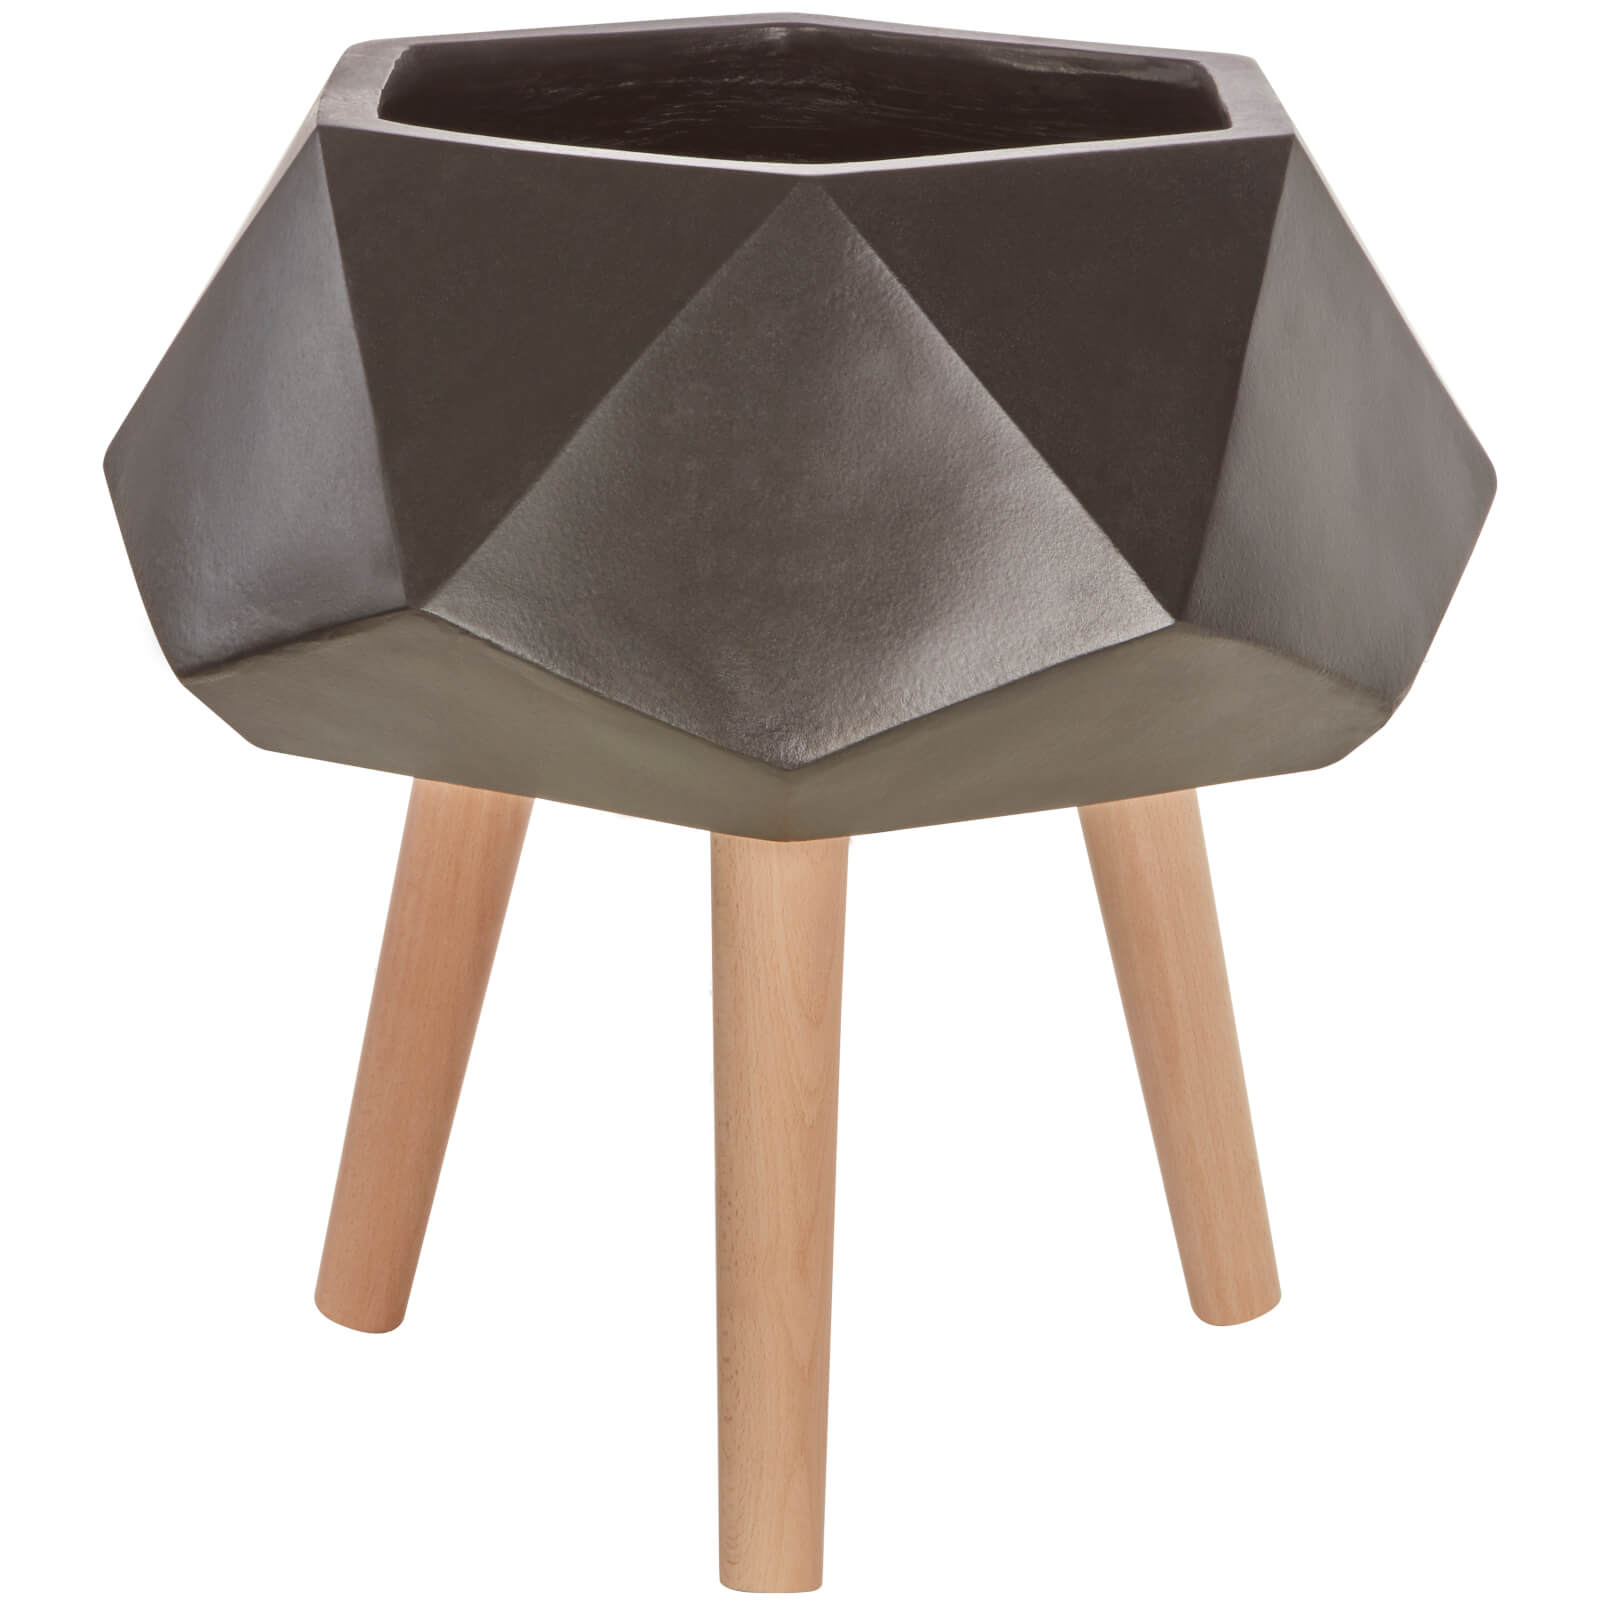 Darnell Multi-Faceted Planter - Black and Wood 2